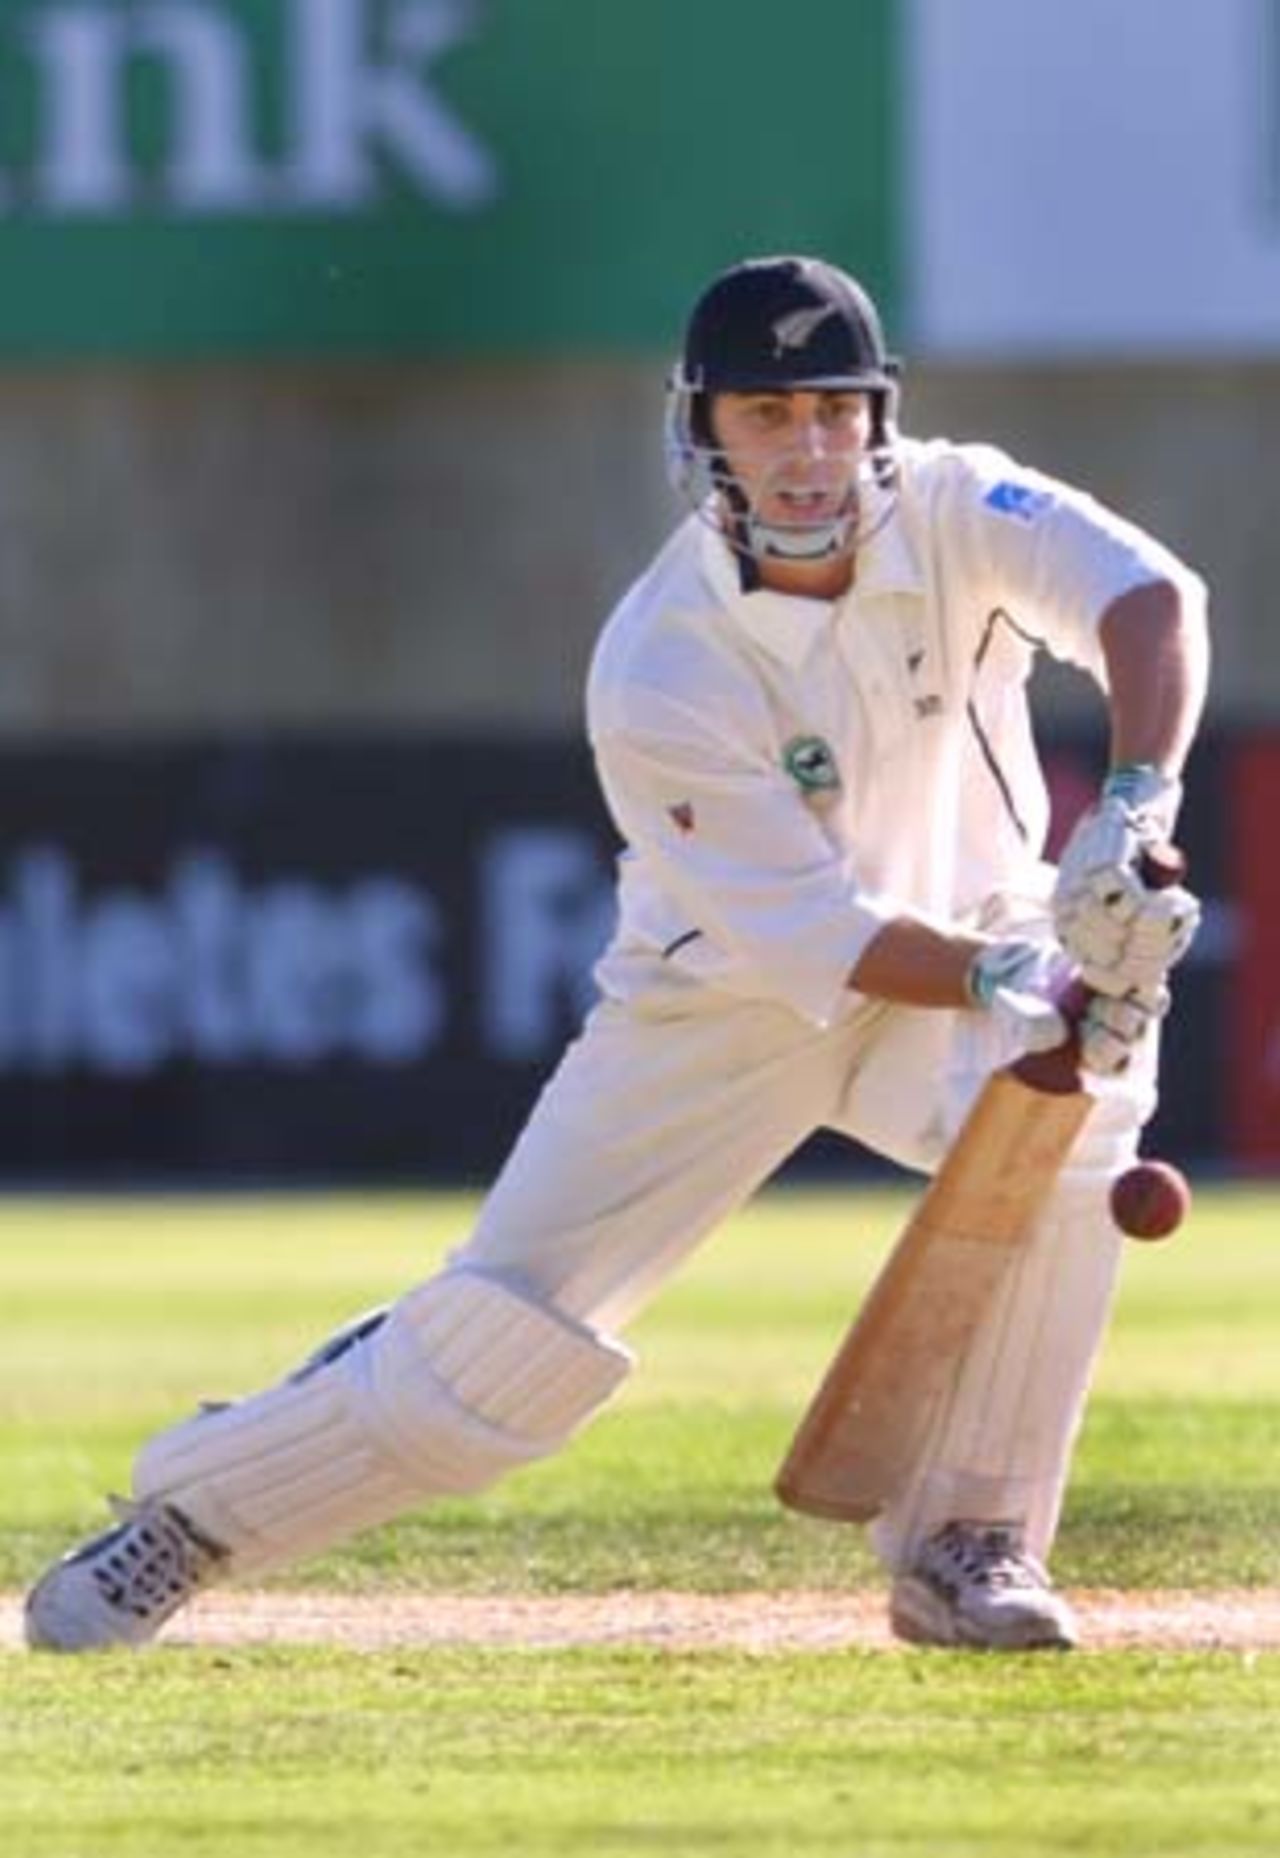 New Zealand batsman Mathew Sinclair defends a ball during his second innings of 50 not out. Sinclair won the man of the match award after also scoring 204 not out in his first innings. 2nd Test: New Zealand v Pakistan at Jade Stadium, Christchurch, 15-19 March 2001 (19 March 2001).